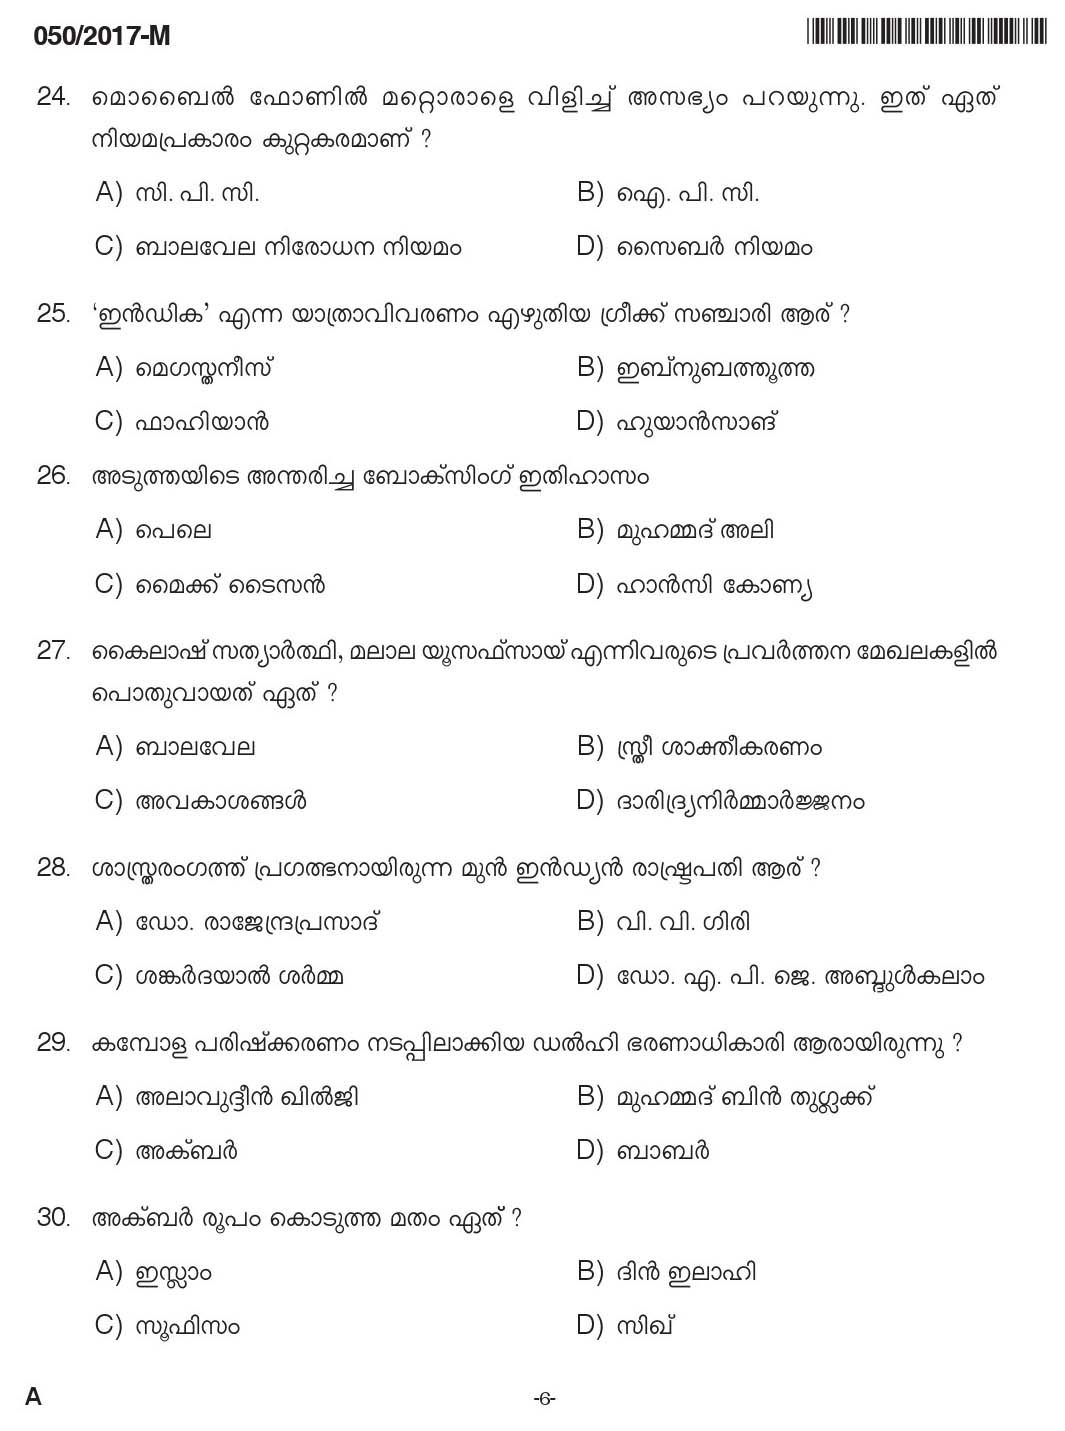 LD Clerk Question Paper 2017 Malayalam Paper Code 0502017 M 5